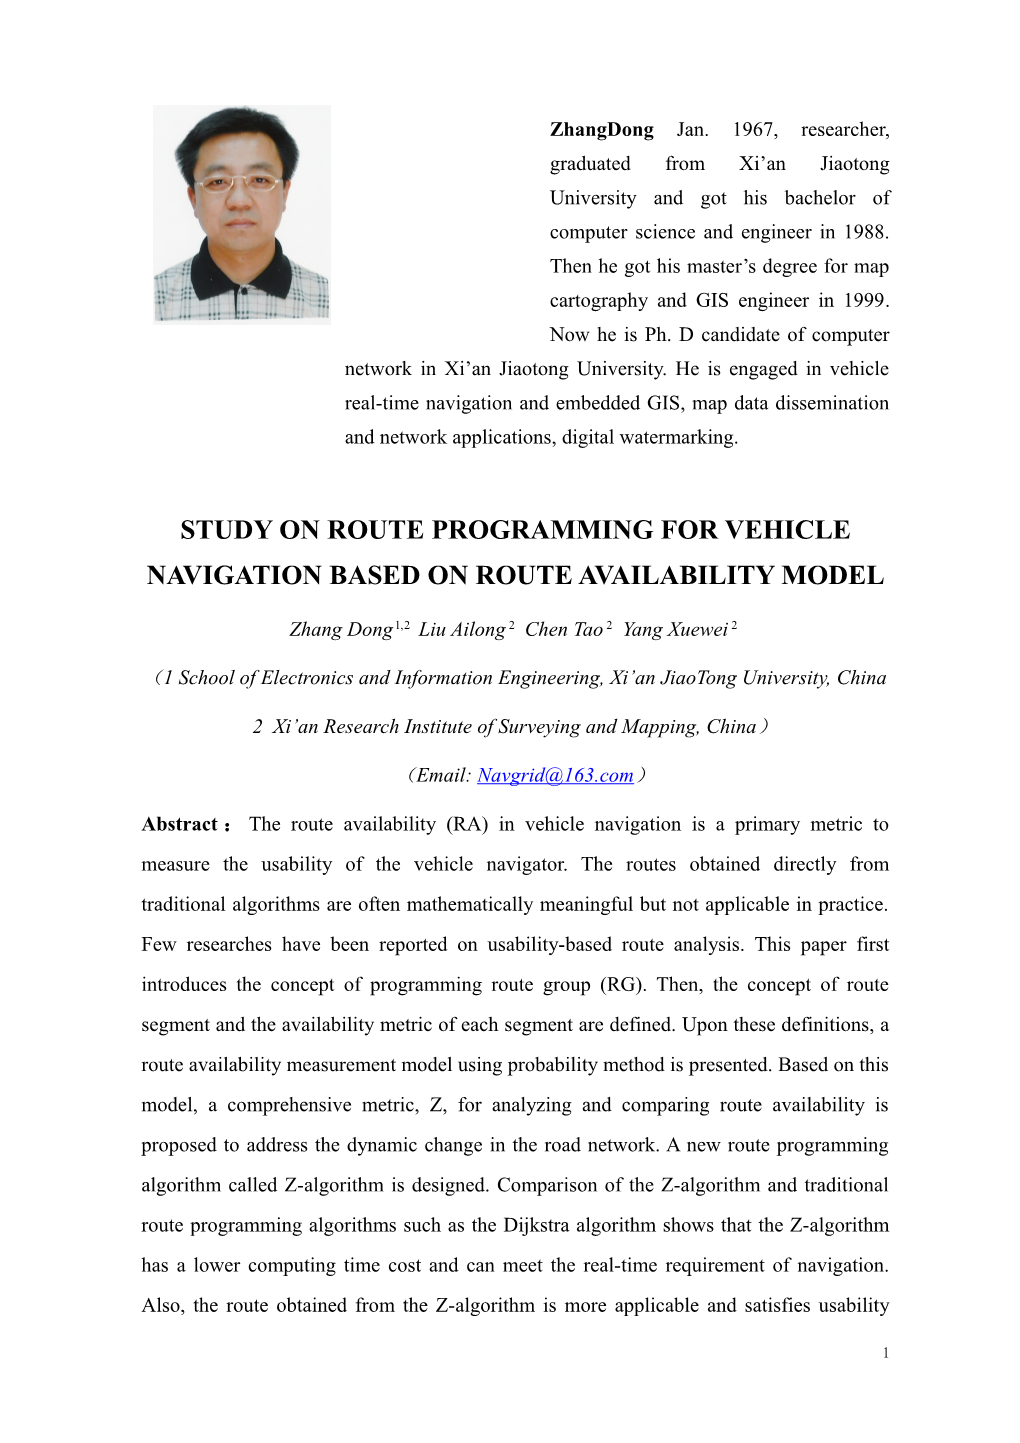 Study on Route Programming for Vehicle Navigation Based on Route Availability Model